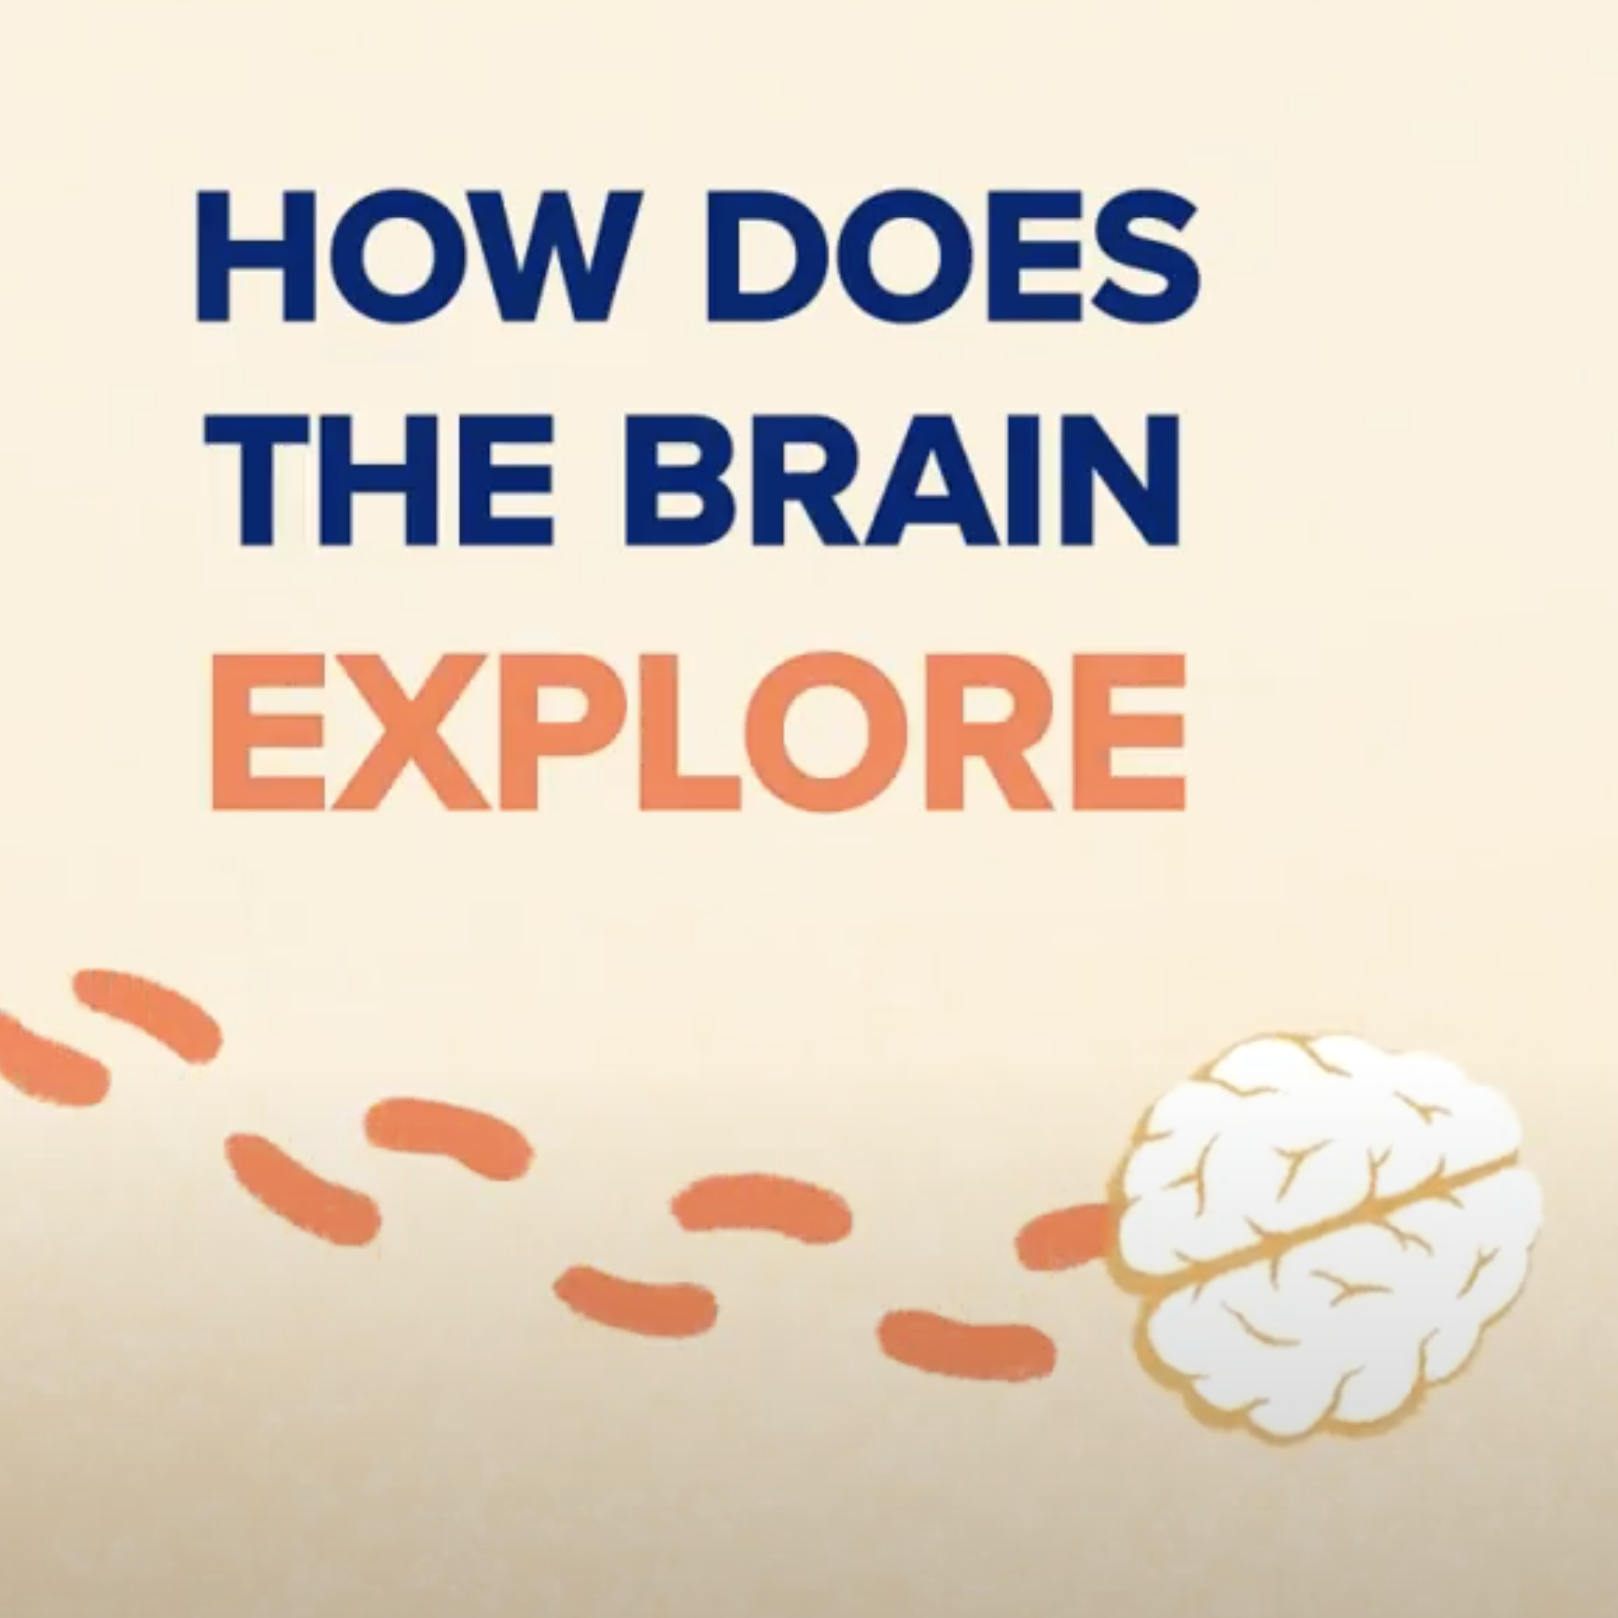 How Does the Brain Explore?